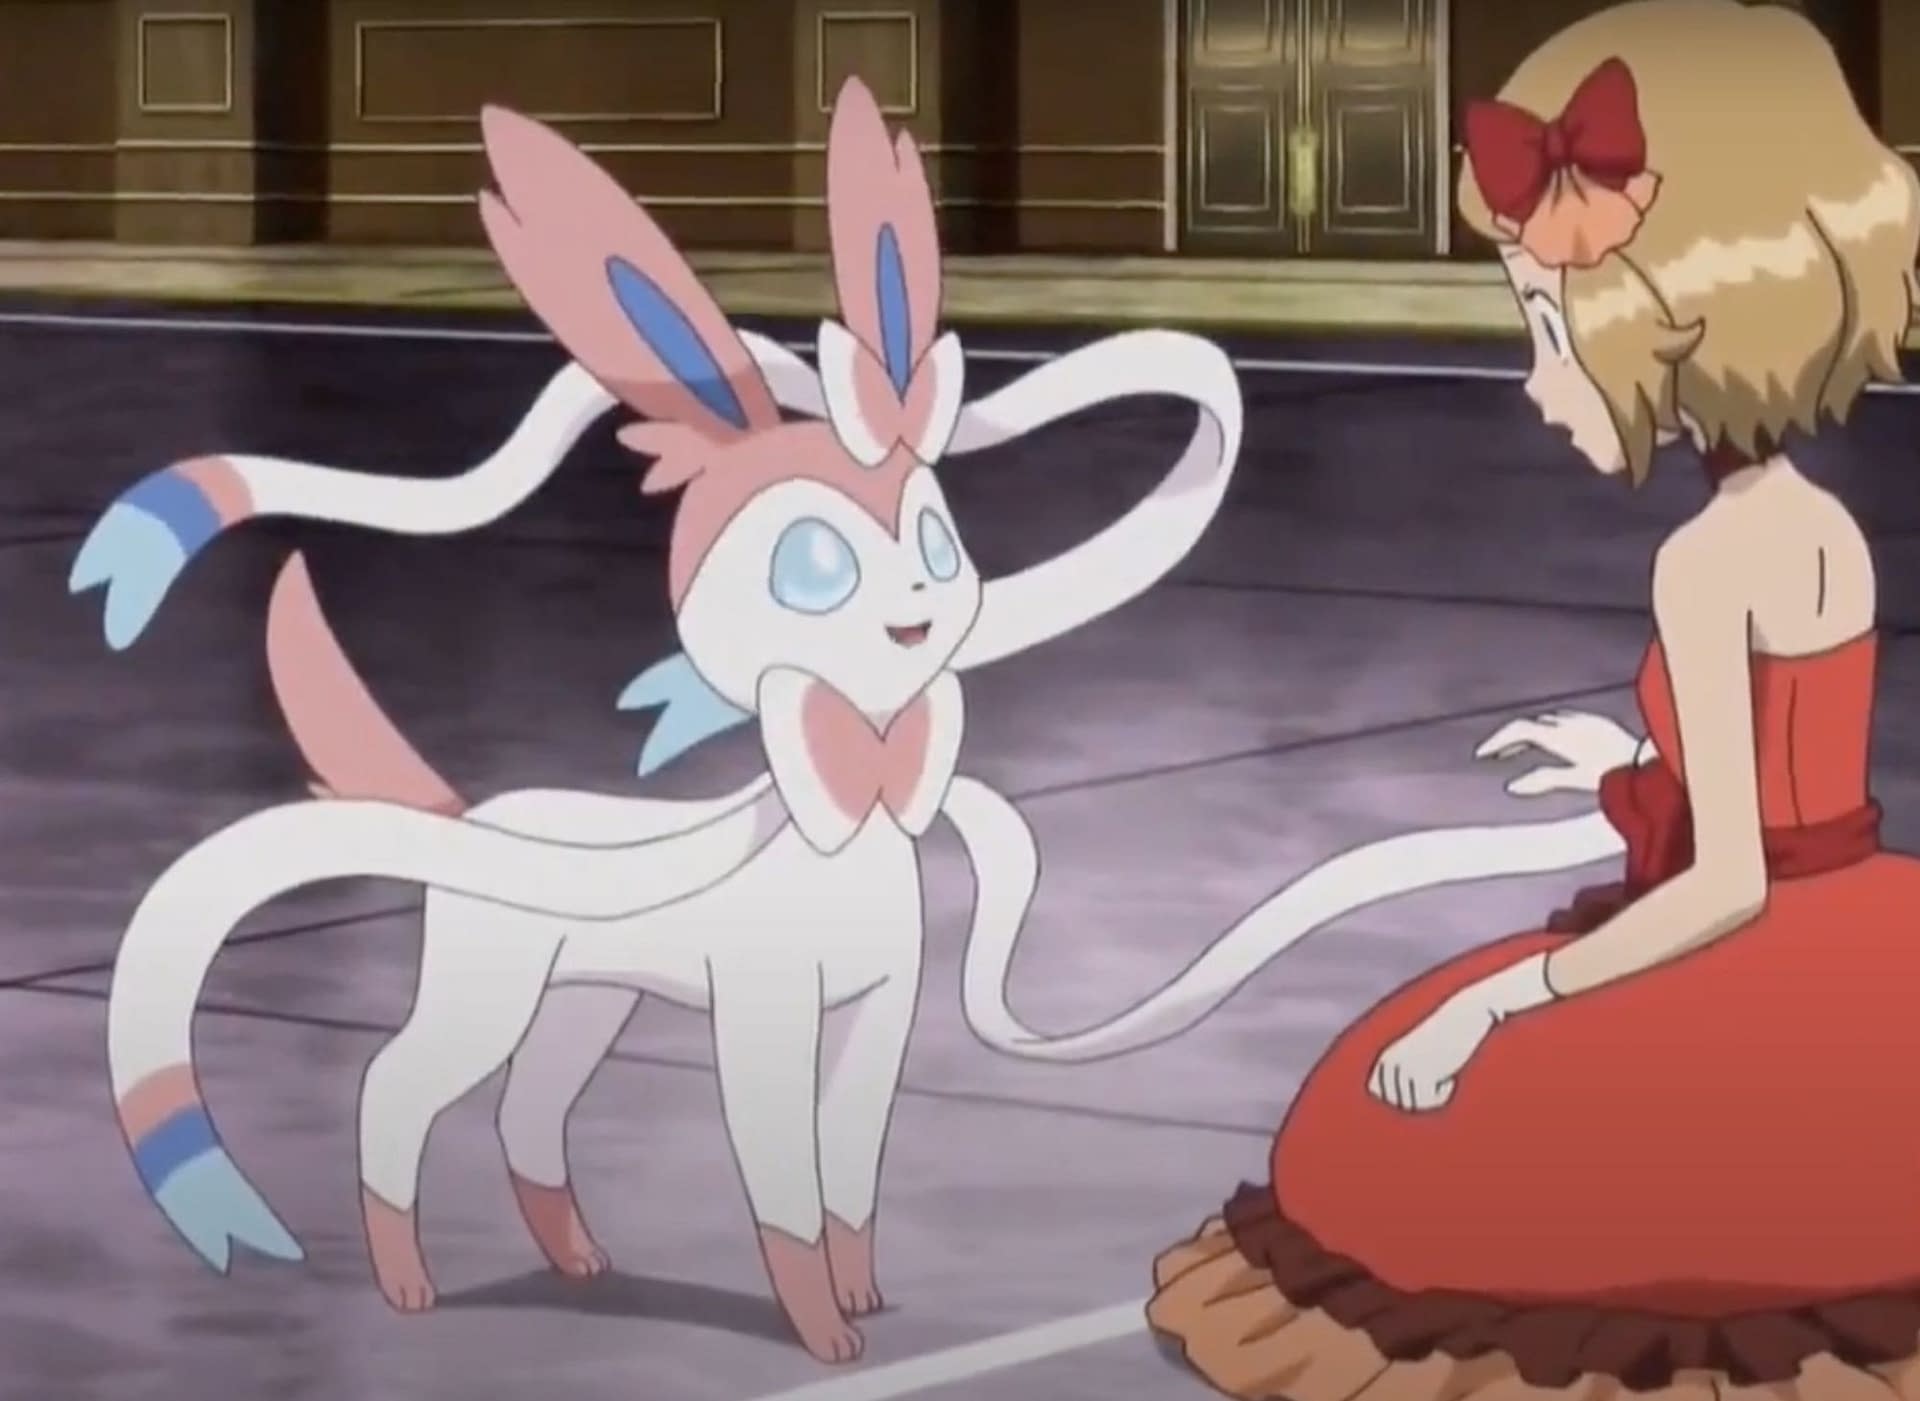 When Will Sylveon Be Released In Pokemon Go